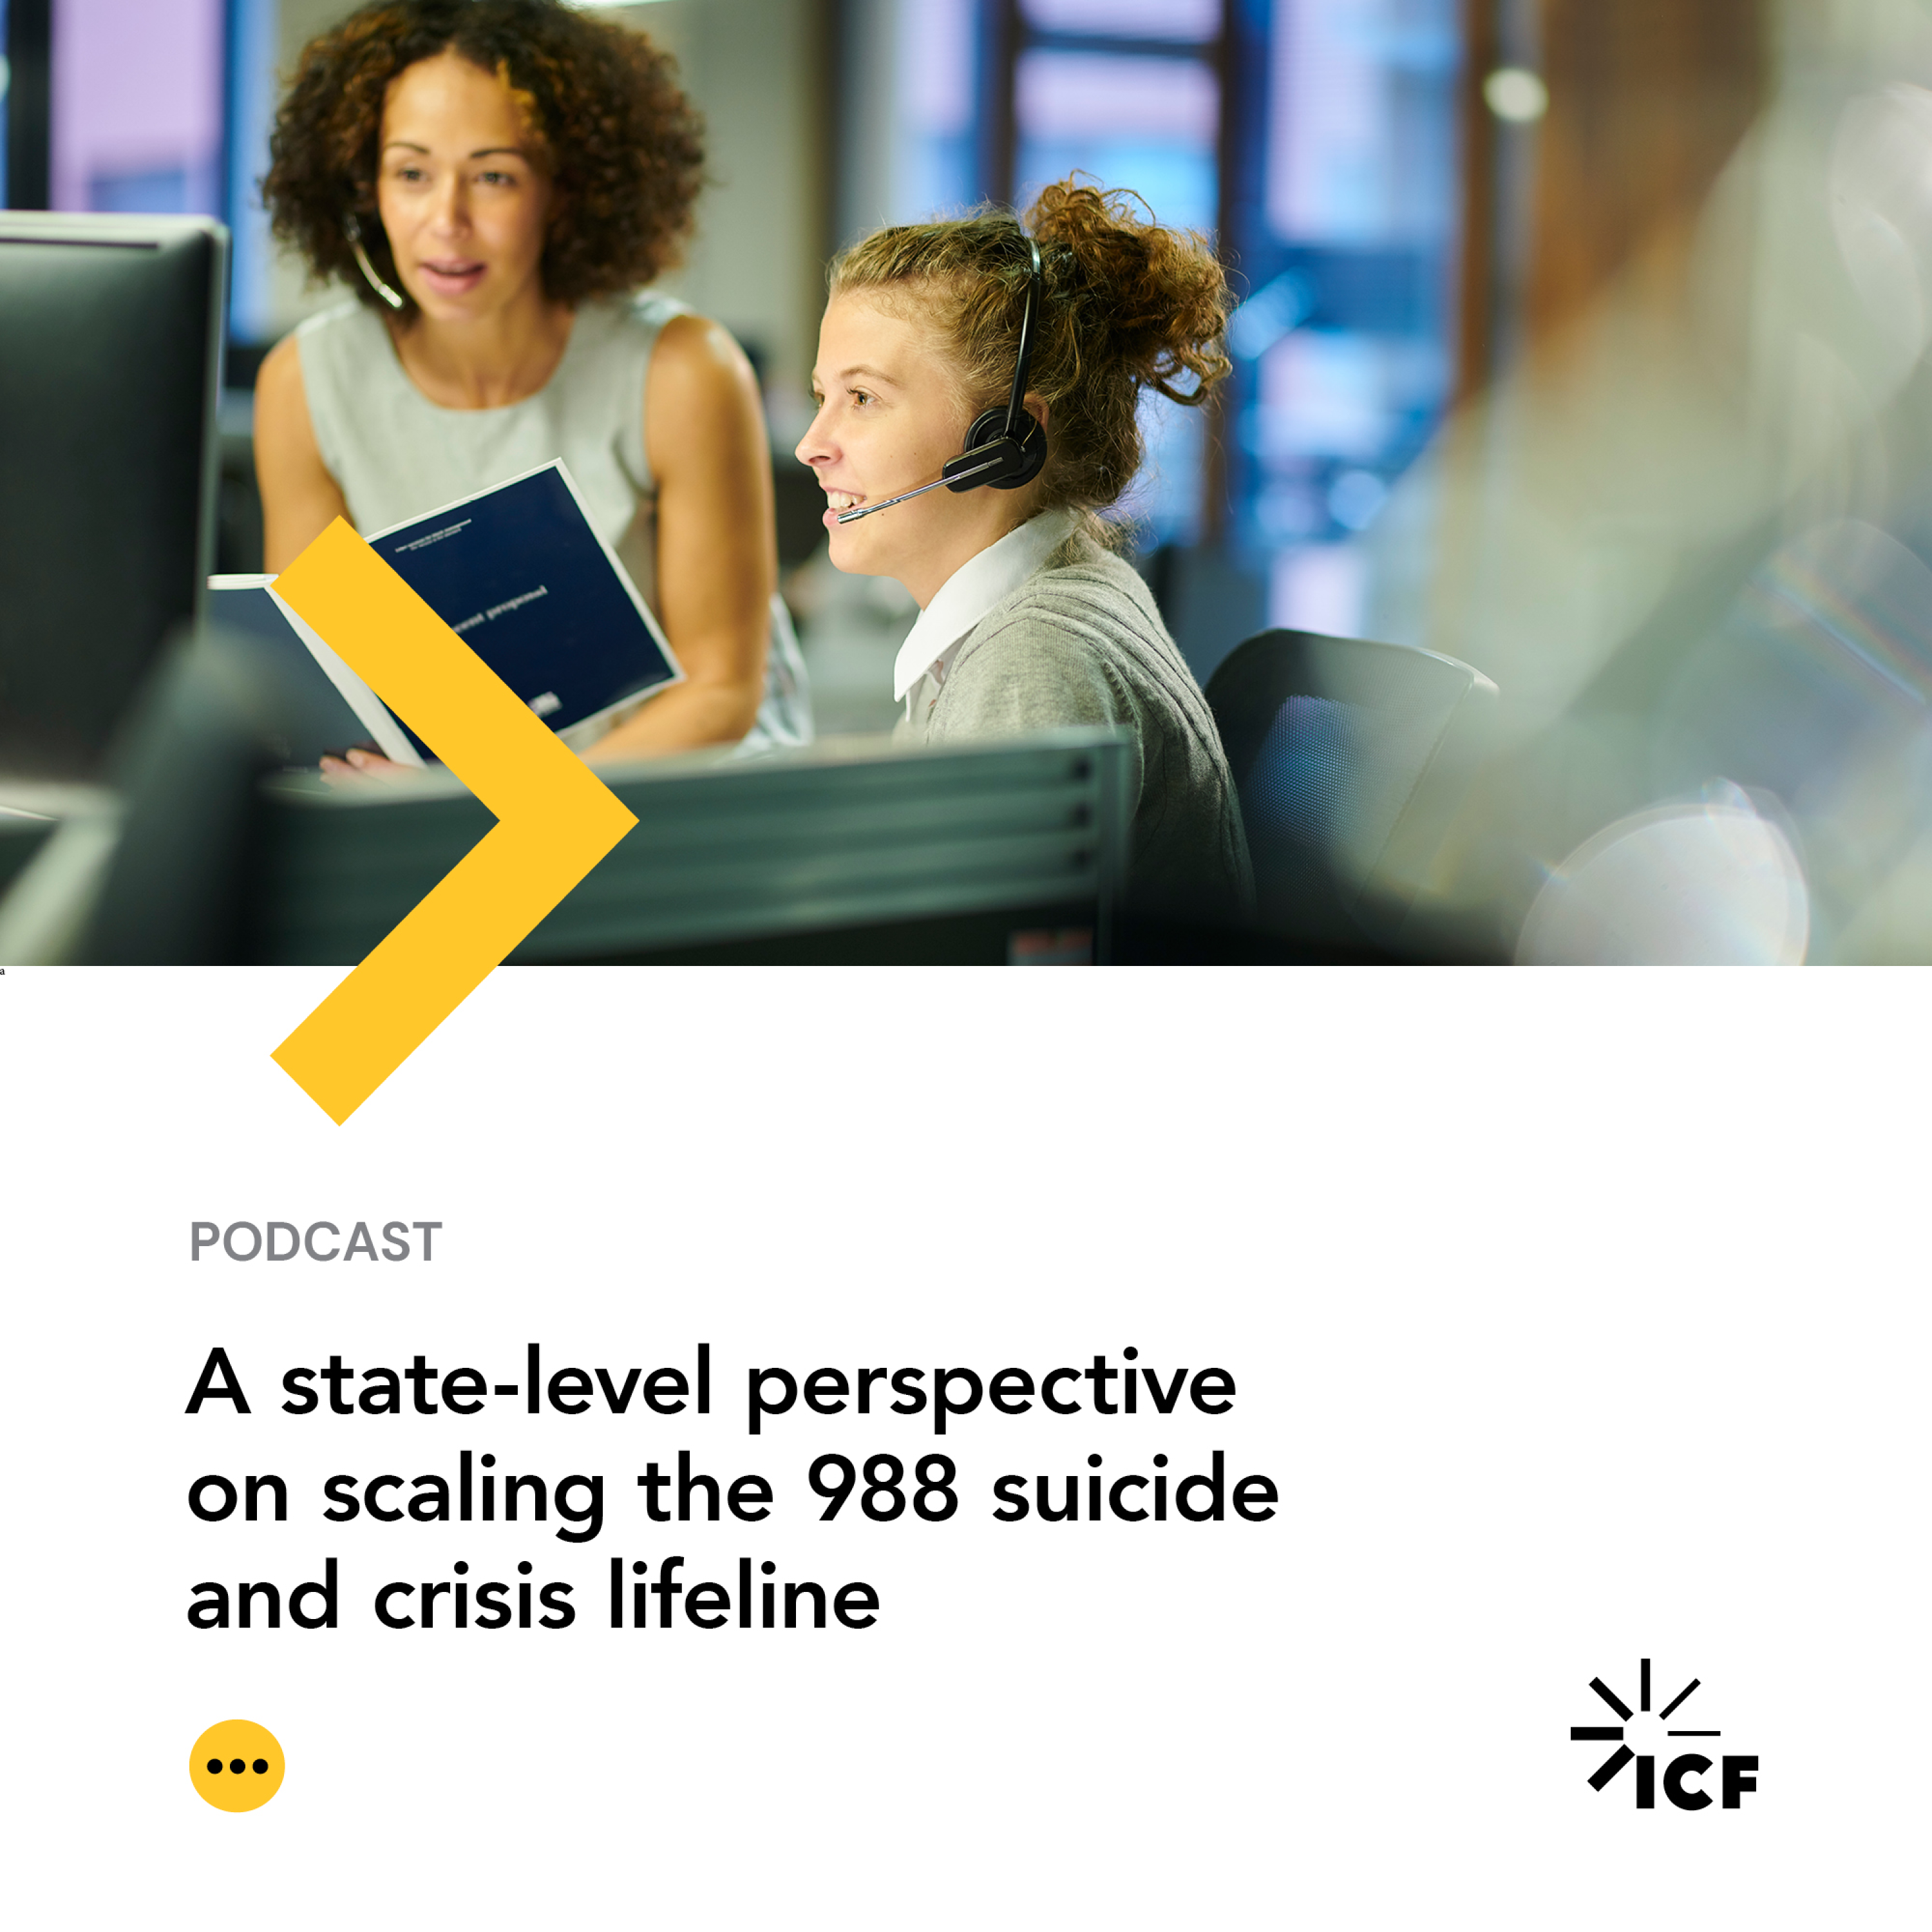 A state-level perspective on scaling the 988 suicide and crisis lifeline